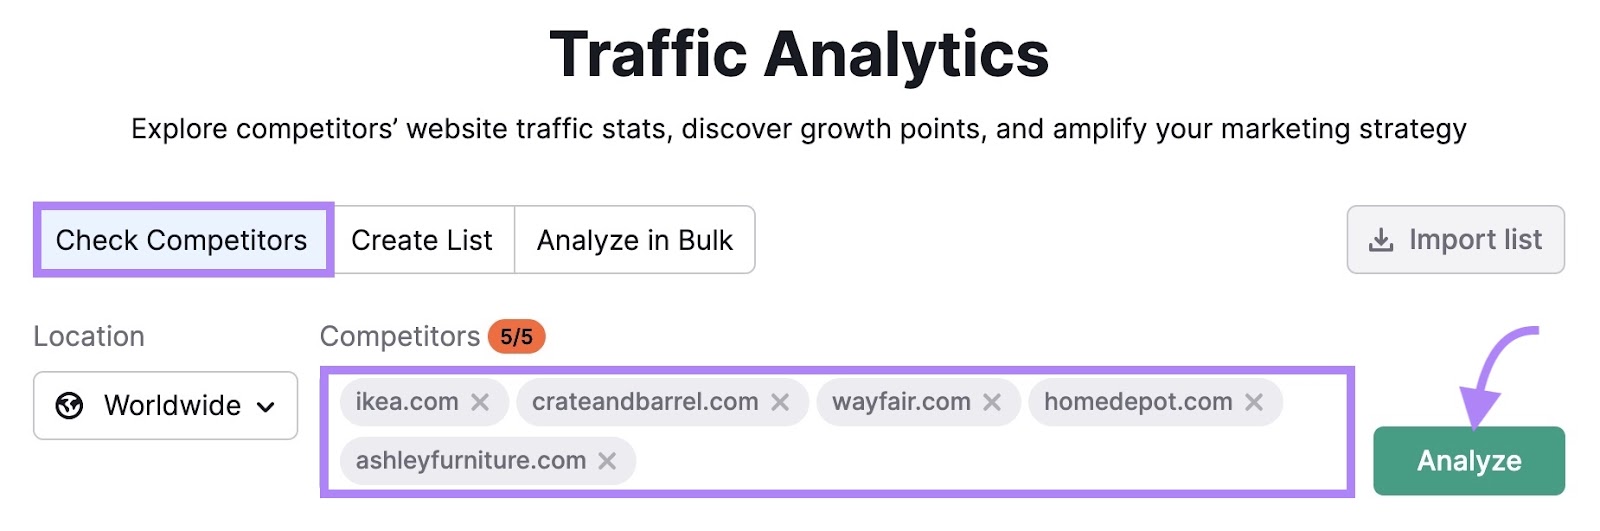 Traffic Analytics tool start with 'Check Competitors' tab selected, 'ikea.com' and 4 competitors entered and the 'Analyze' button selected.